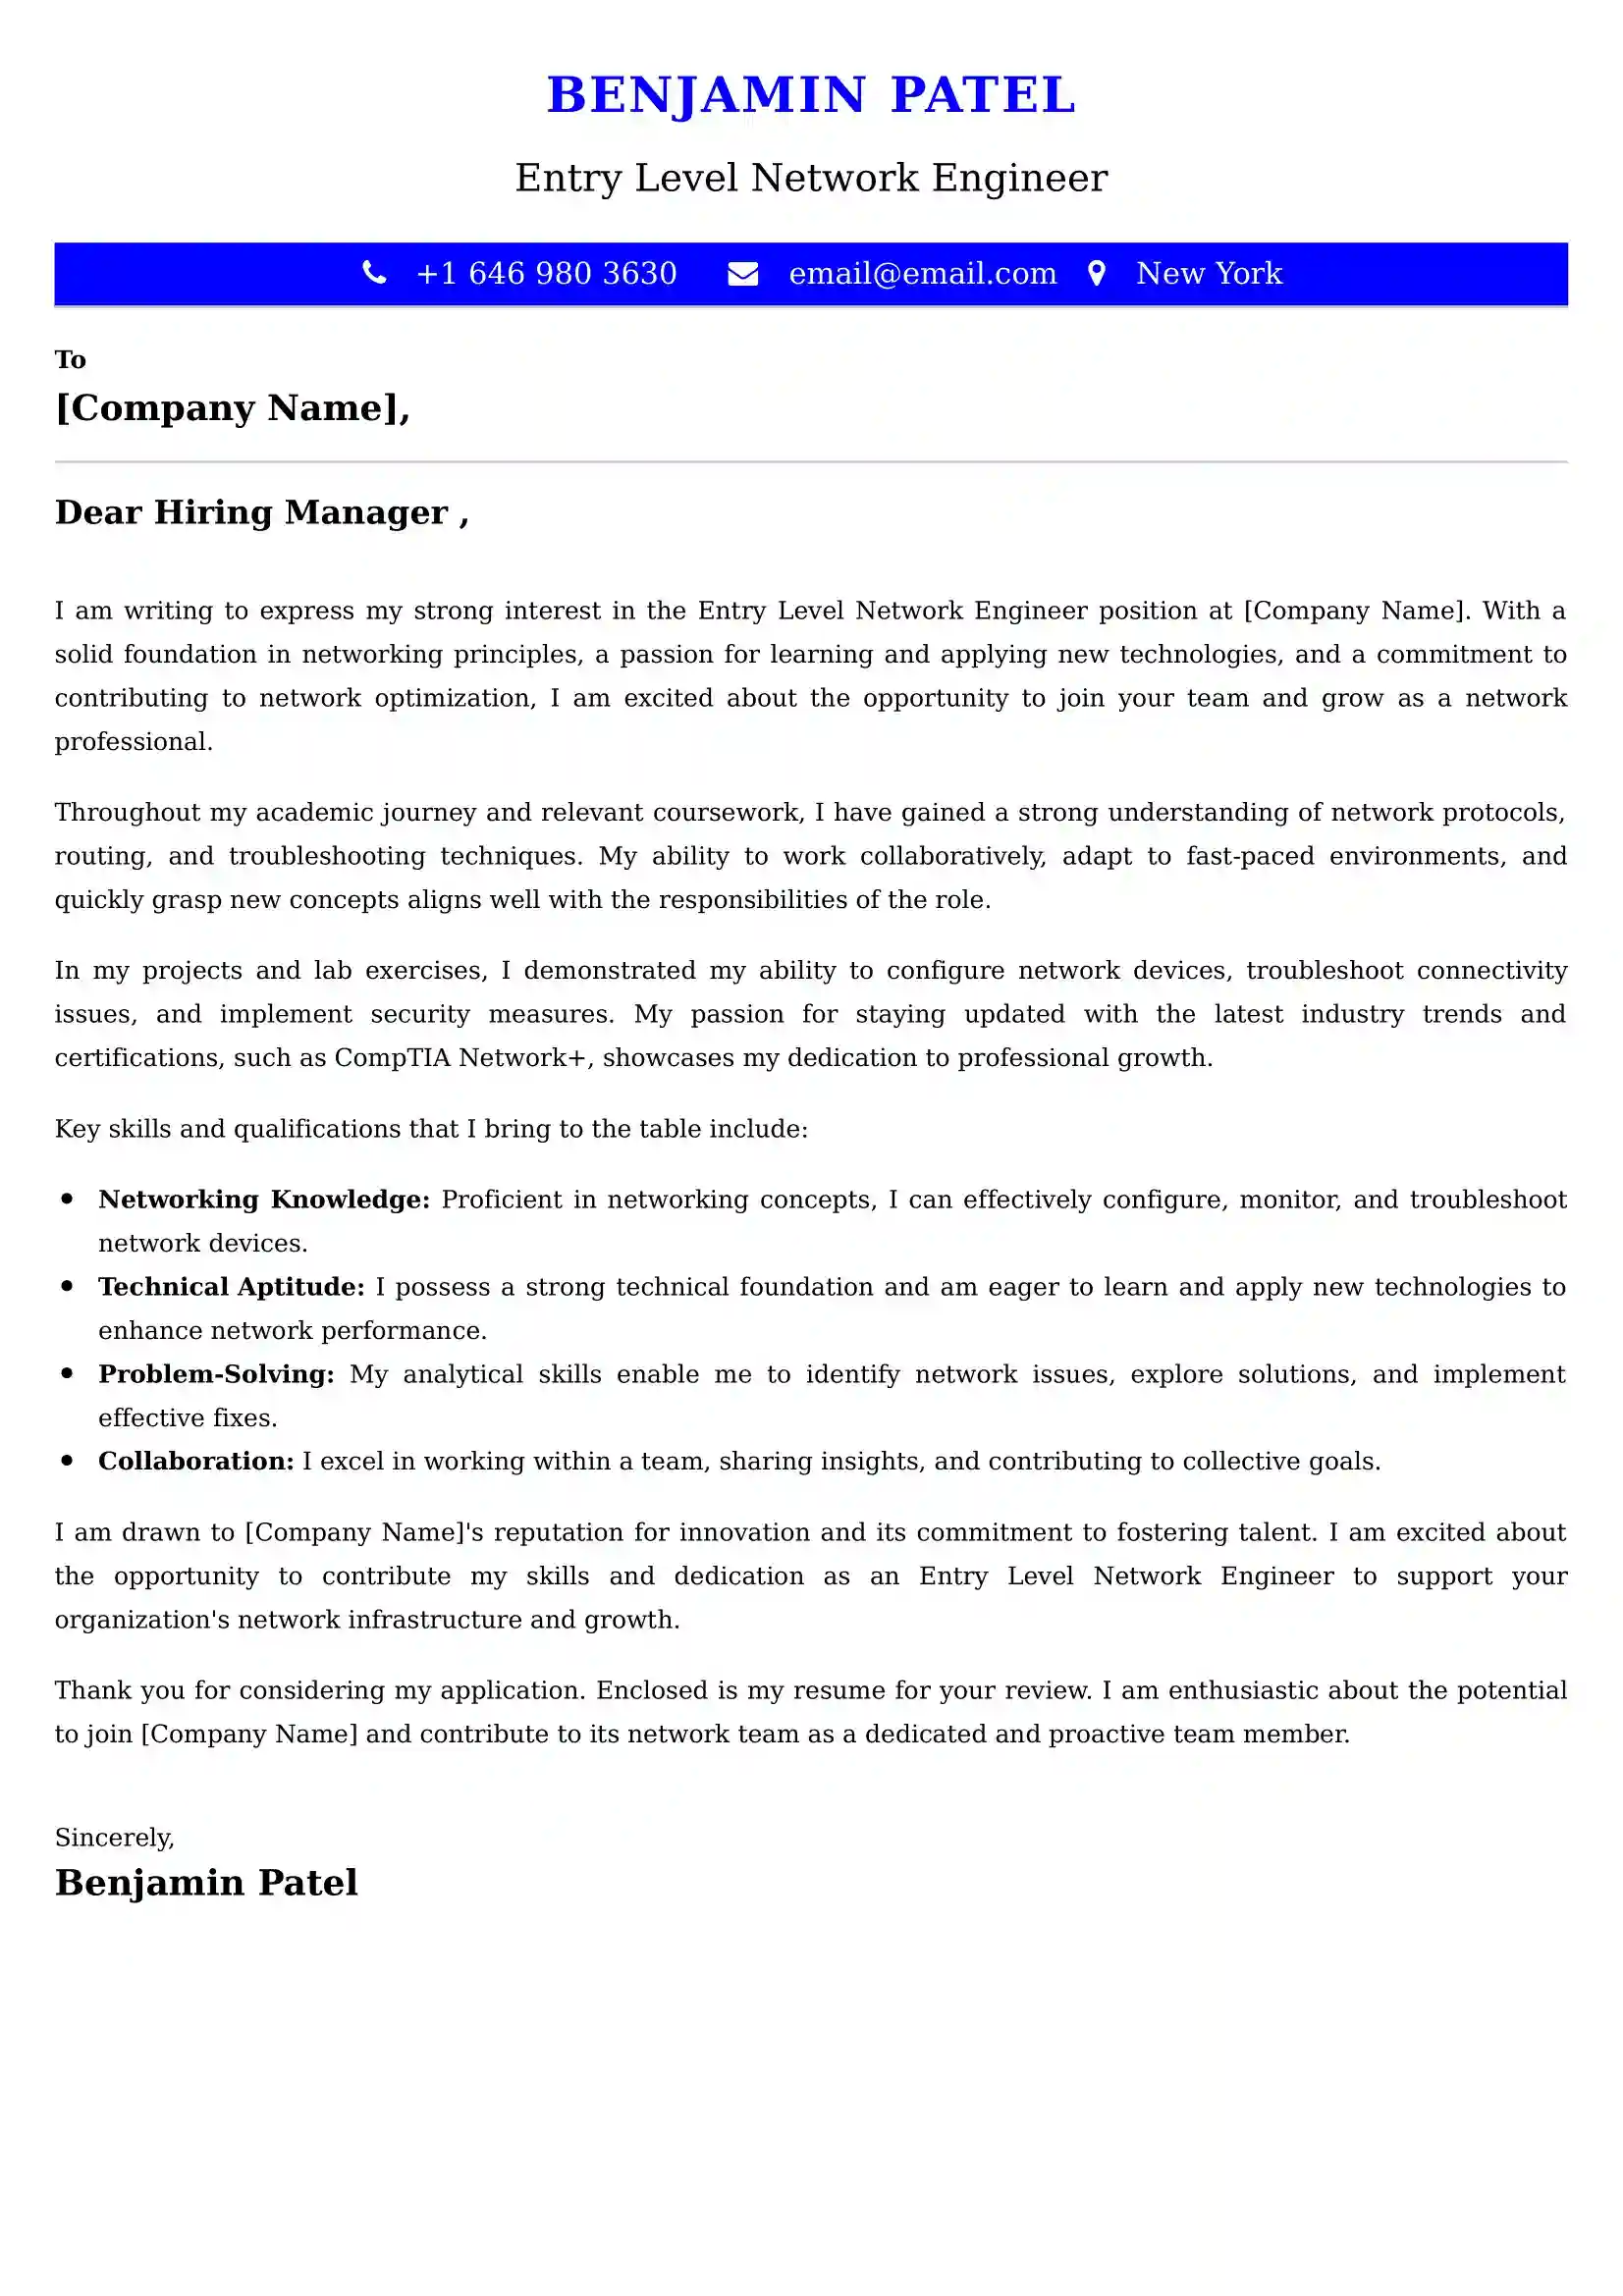 Entry Level Network Engineer Cover Letter Examples - US Format and Tips